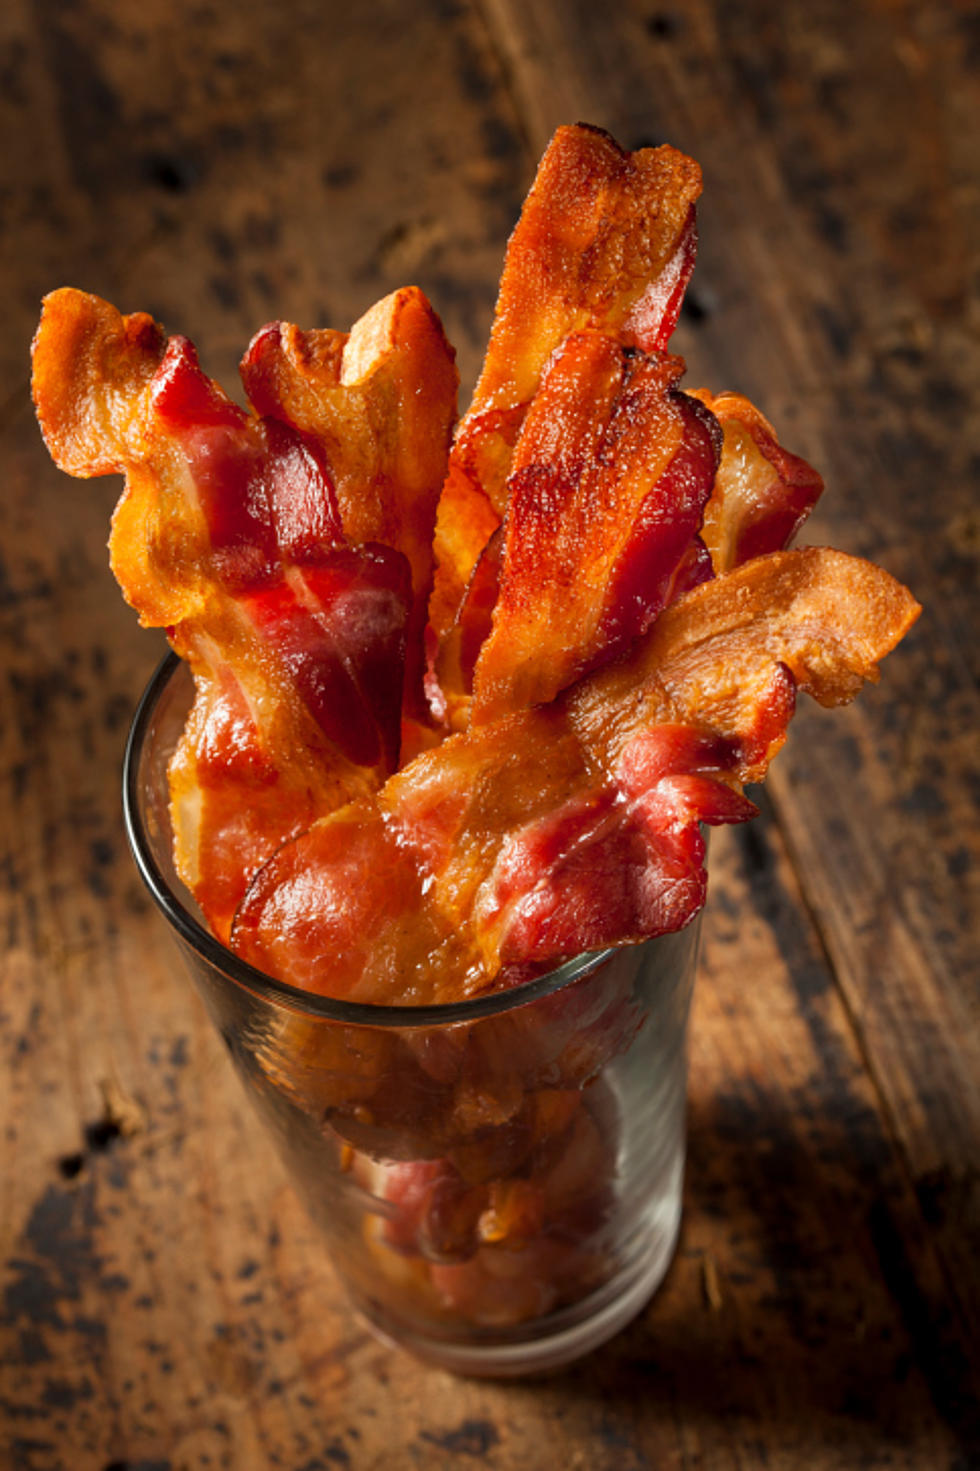 Ever Try Laquered Bacon? Here’s a Cool Recipe